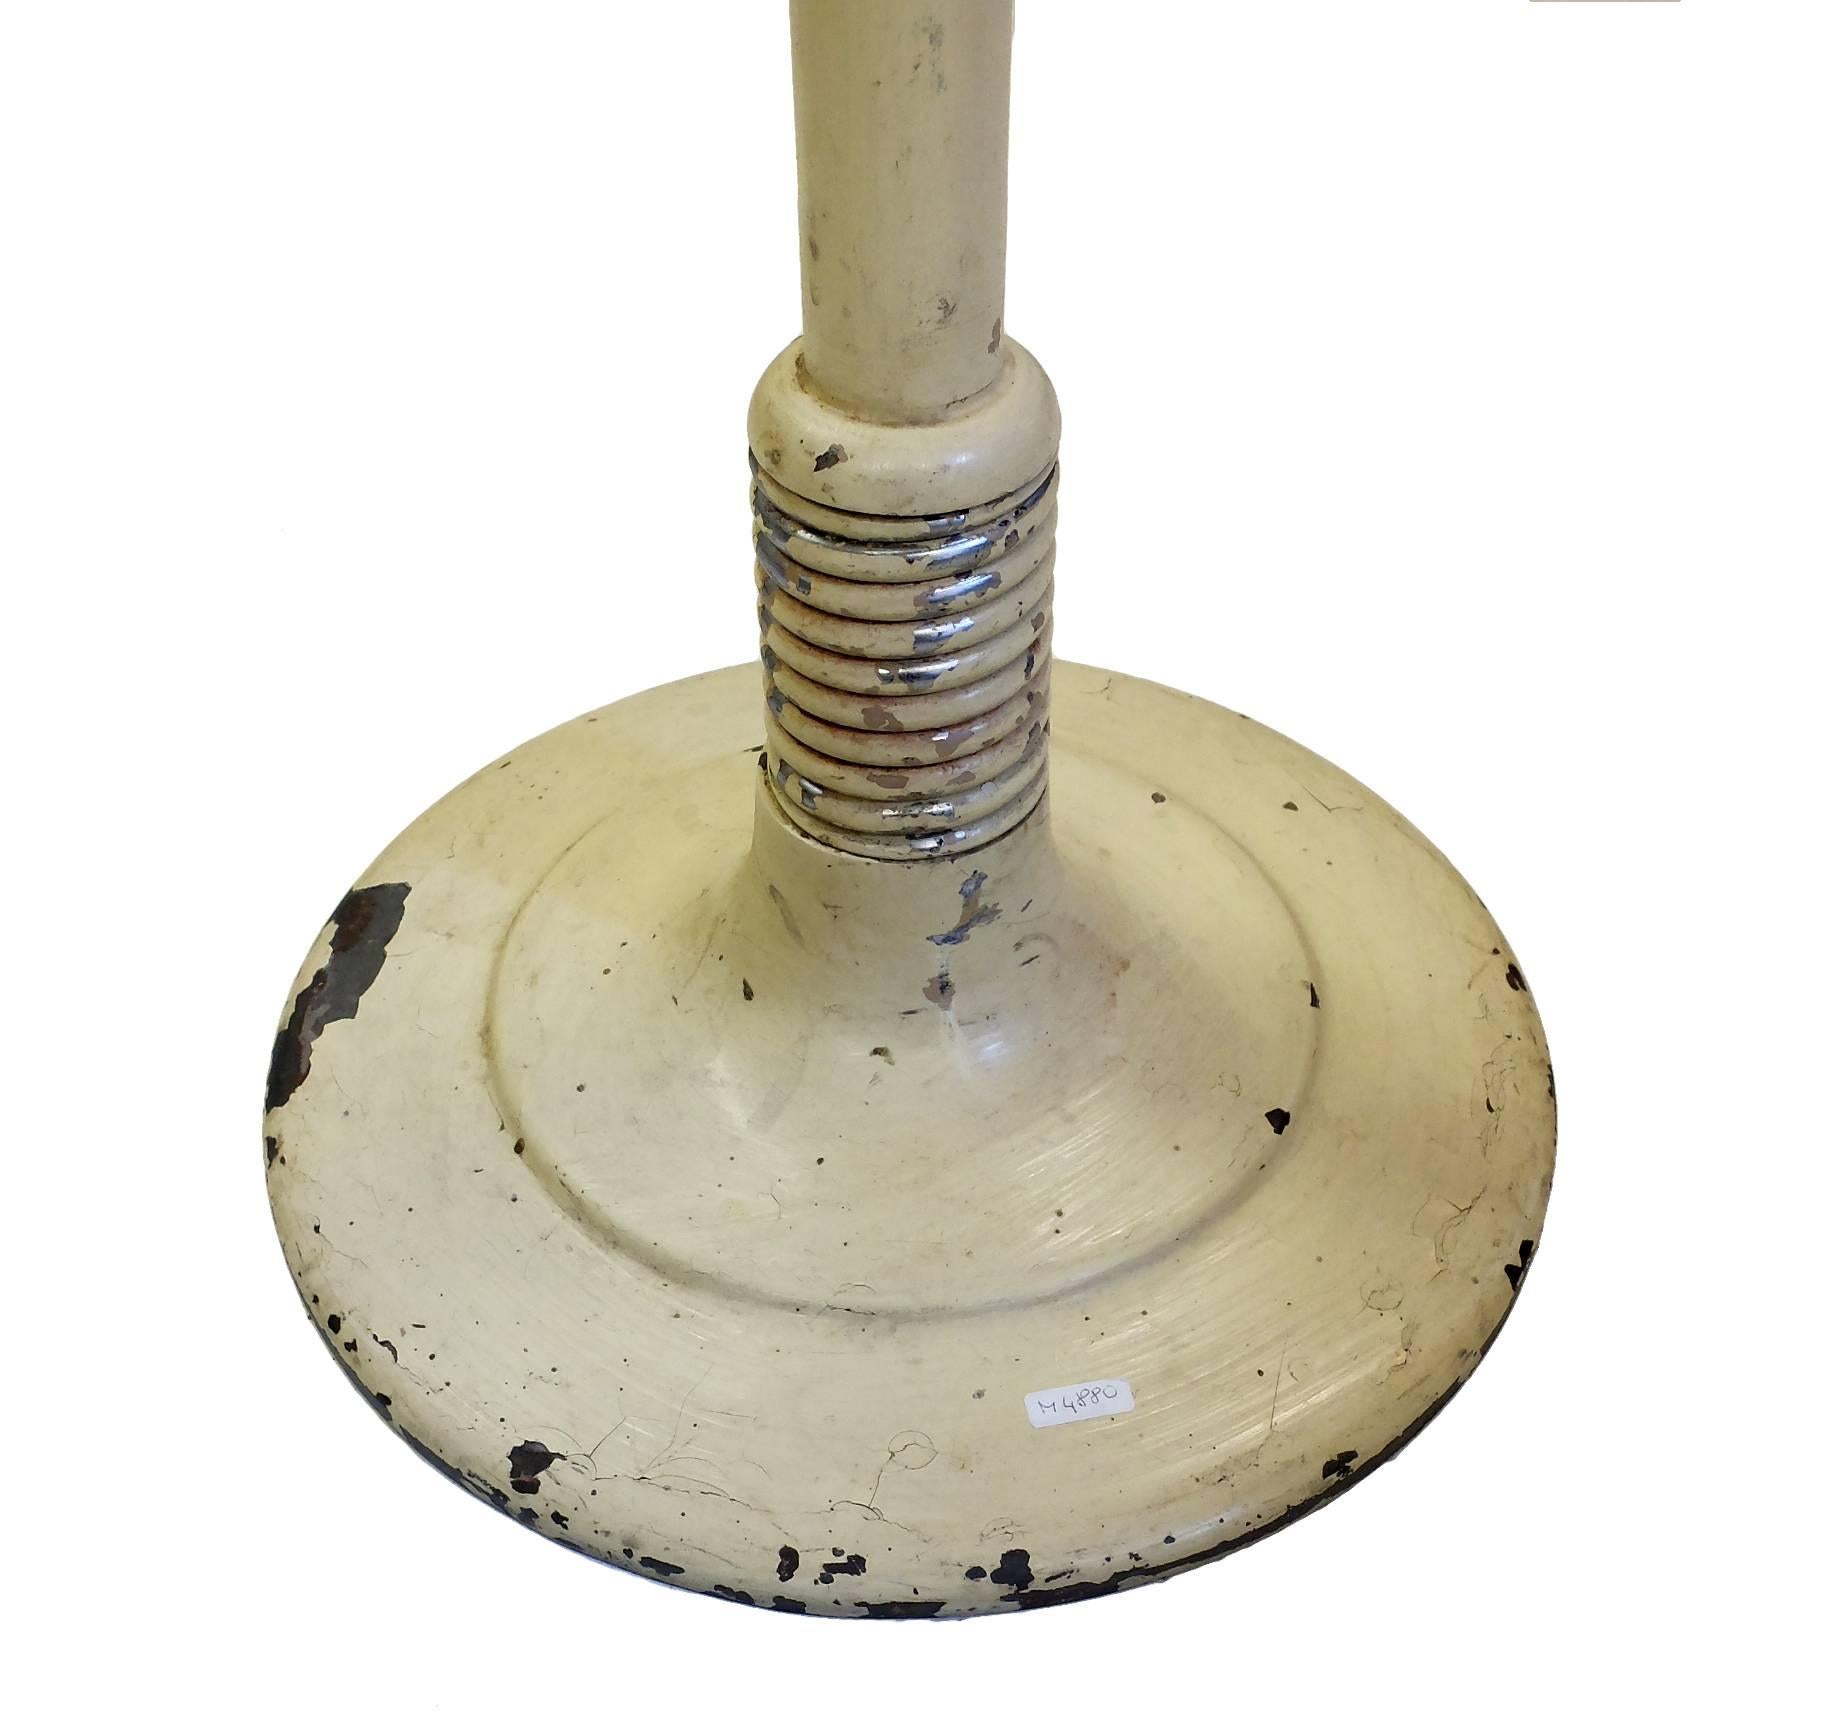 An unusual adjustable cast iron dentist’s stool with a big metal spring, weight motion. Original white color.